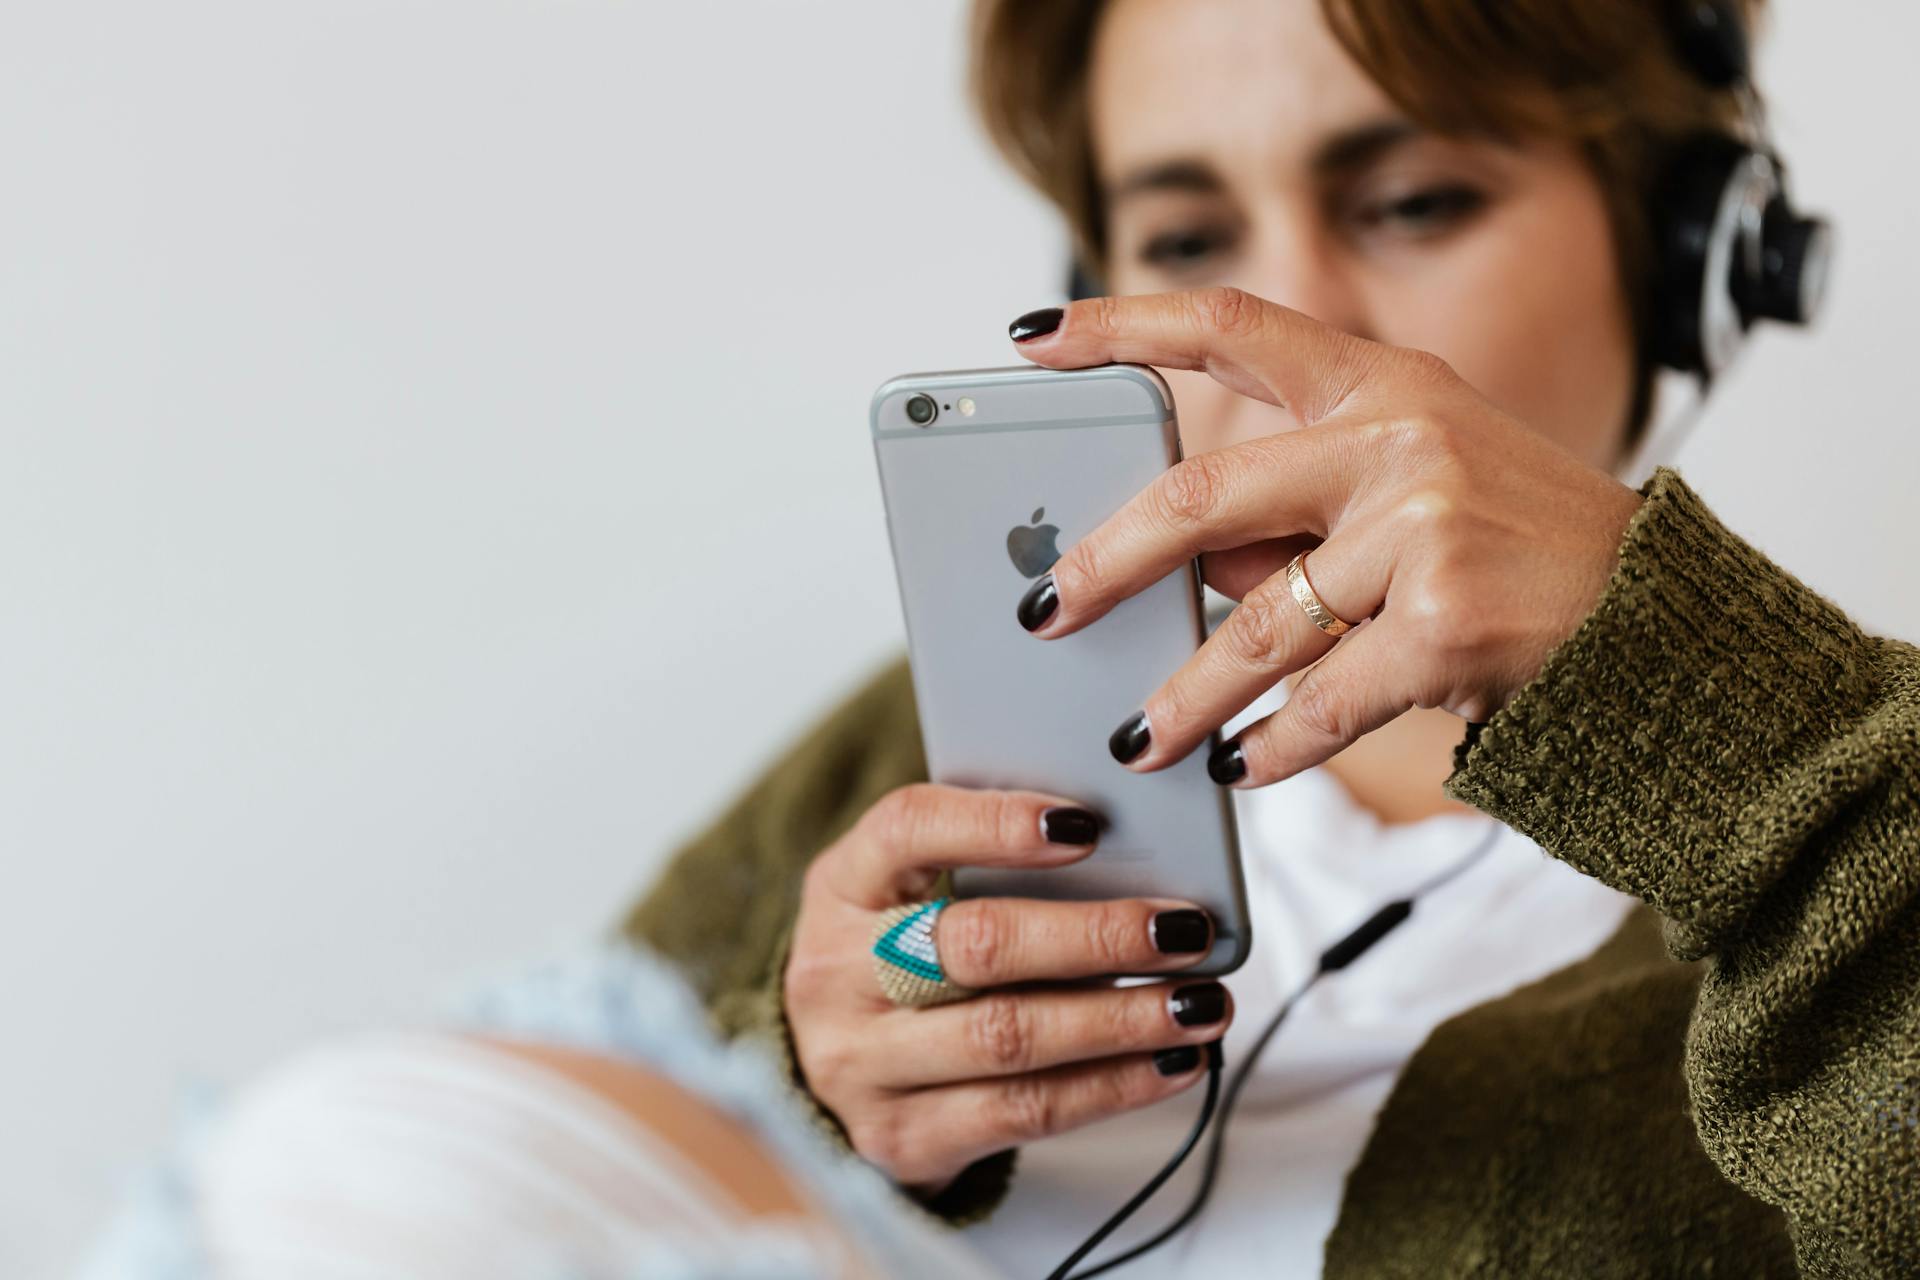 Crop blurred focused female in casual warm clothes with classy ring surfing contemporary cellphone while enjoying favorite music via wired headphones against white plain wall